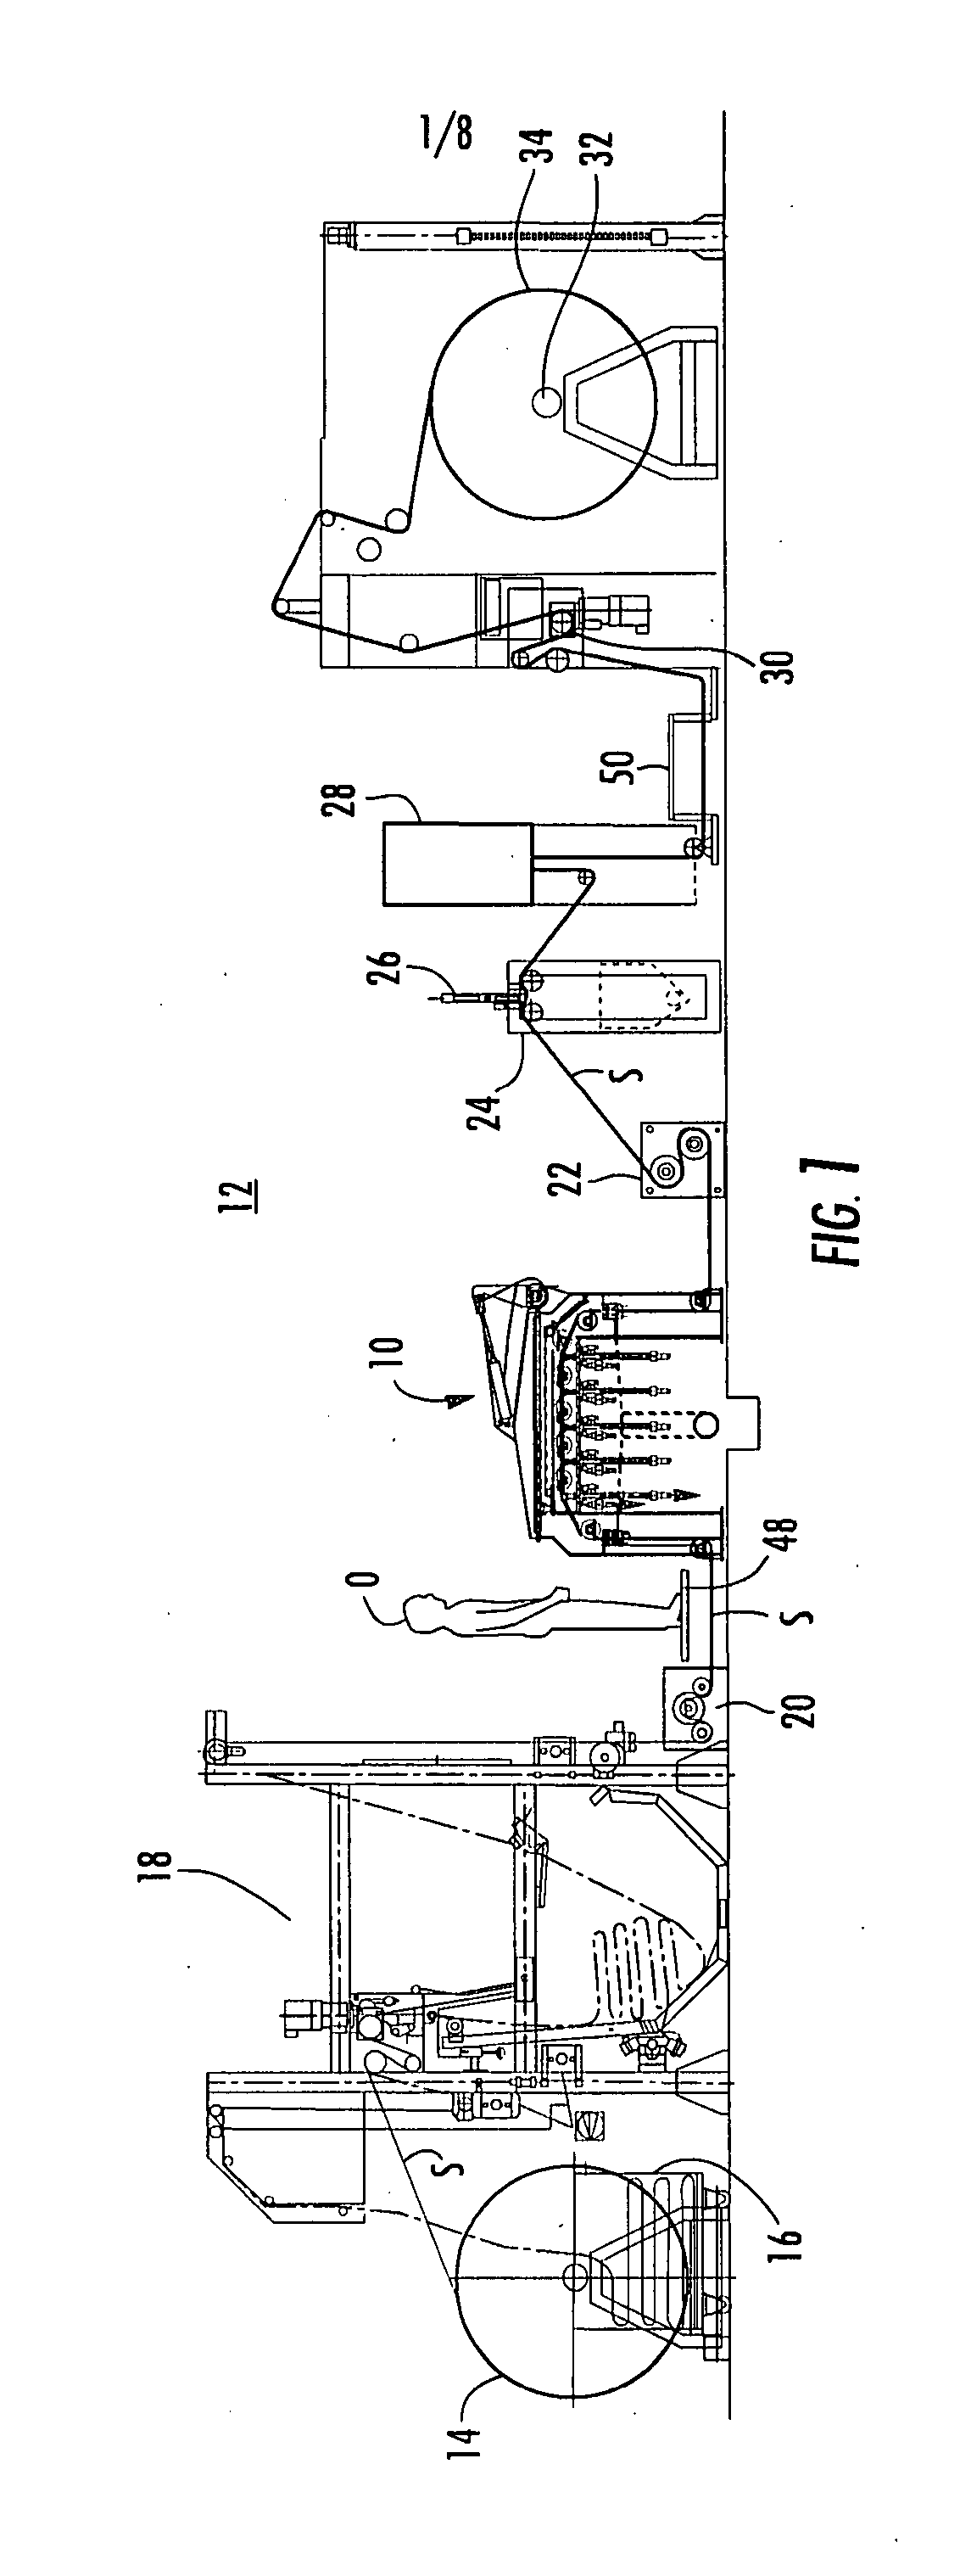 Method and apparatus for dyeing cellulosic textile substrates with a leuco-state dye